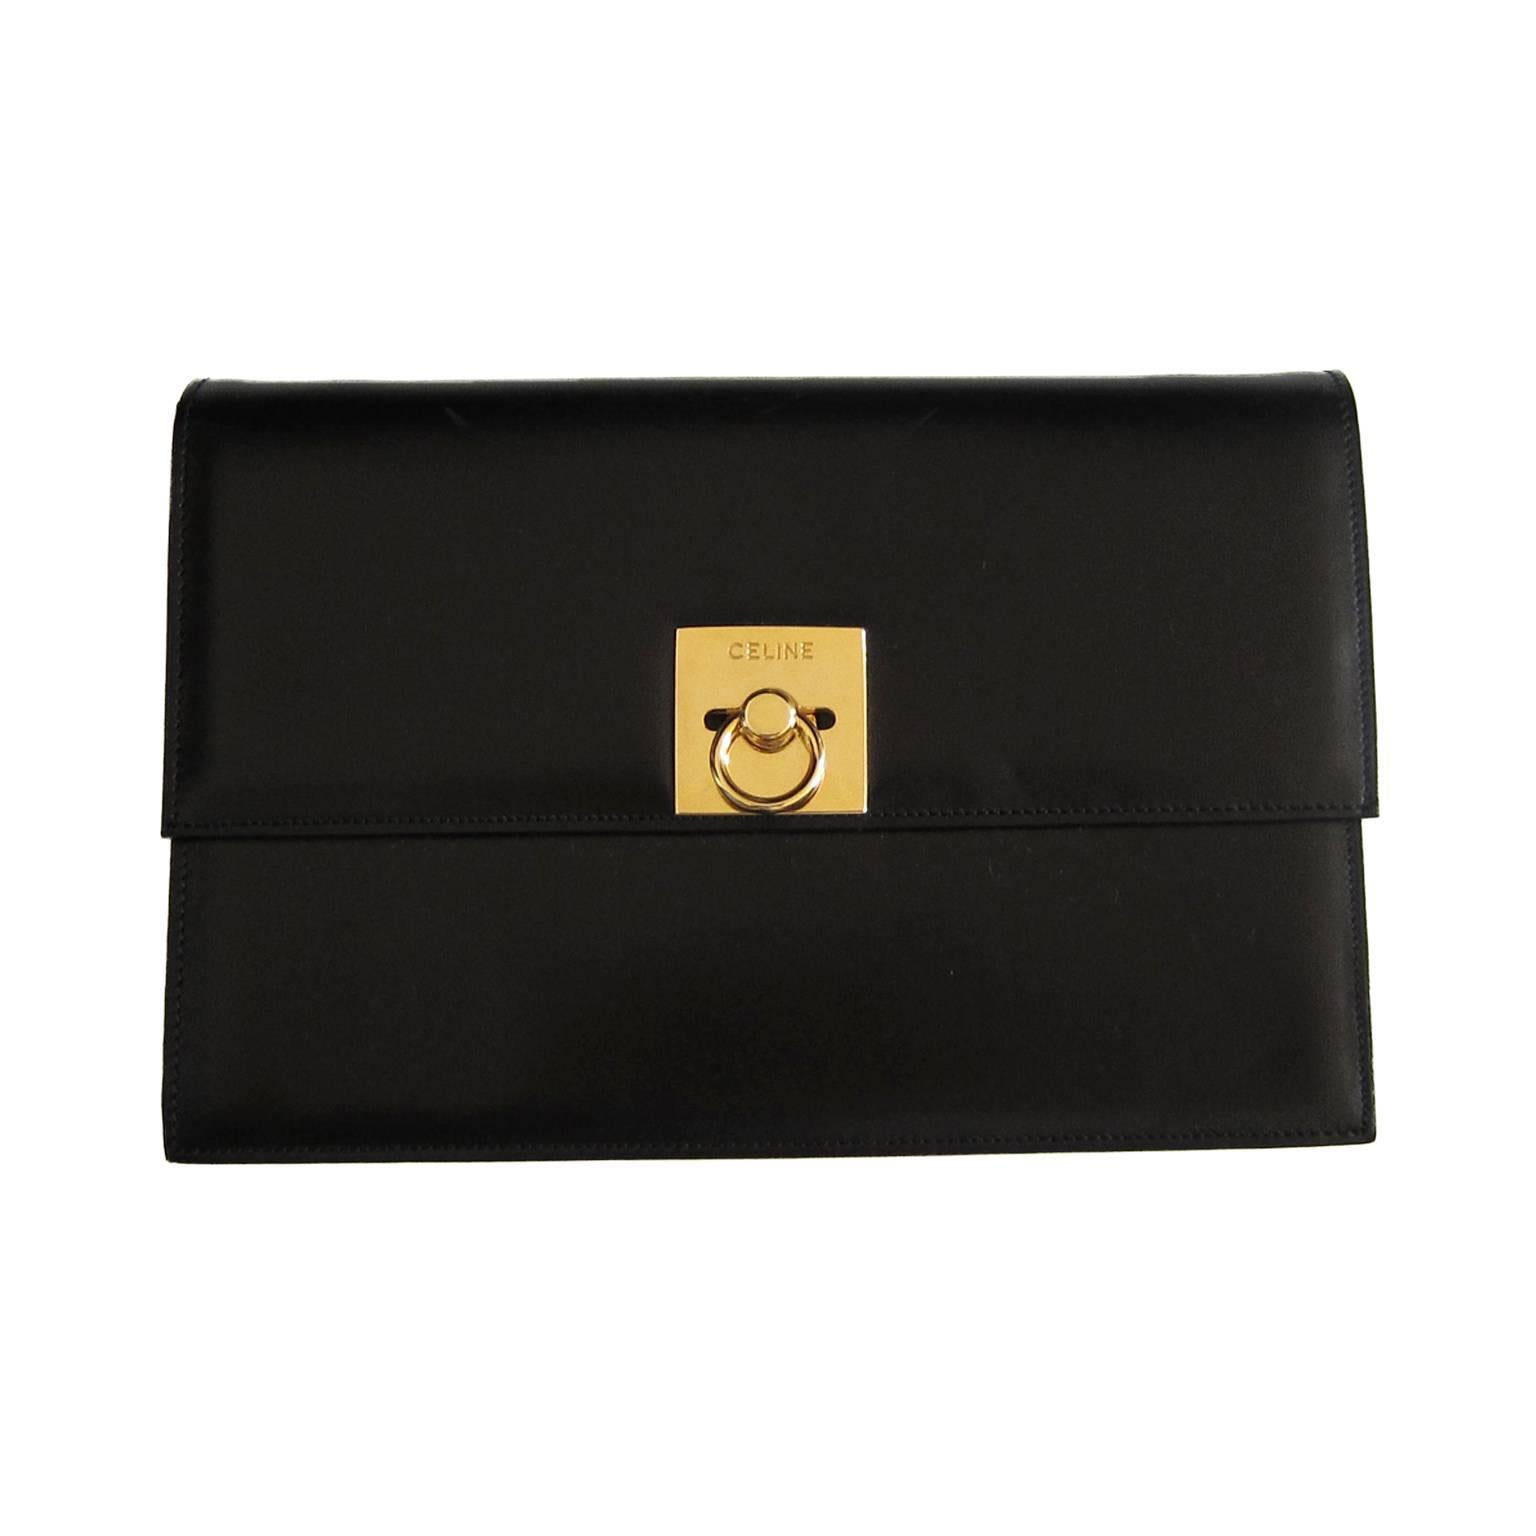 Céline Paris vintage shoulder / clutch box bag in black leather. It has a beautiful classic golden square closure with embossed logo.  
Inside - vivid orange red lining with two open pockets. Including original dust bag. 
Made in